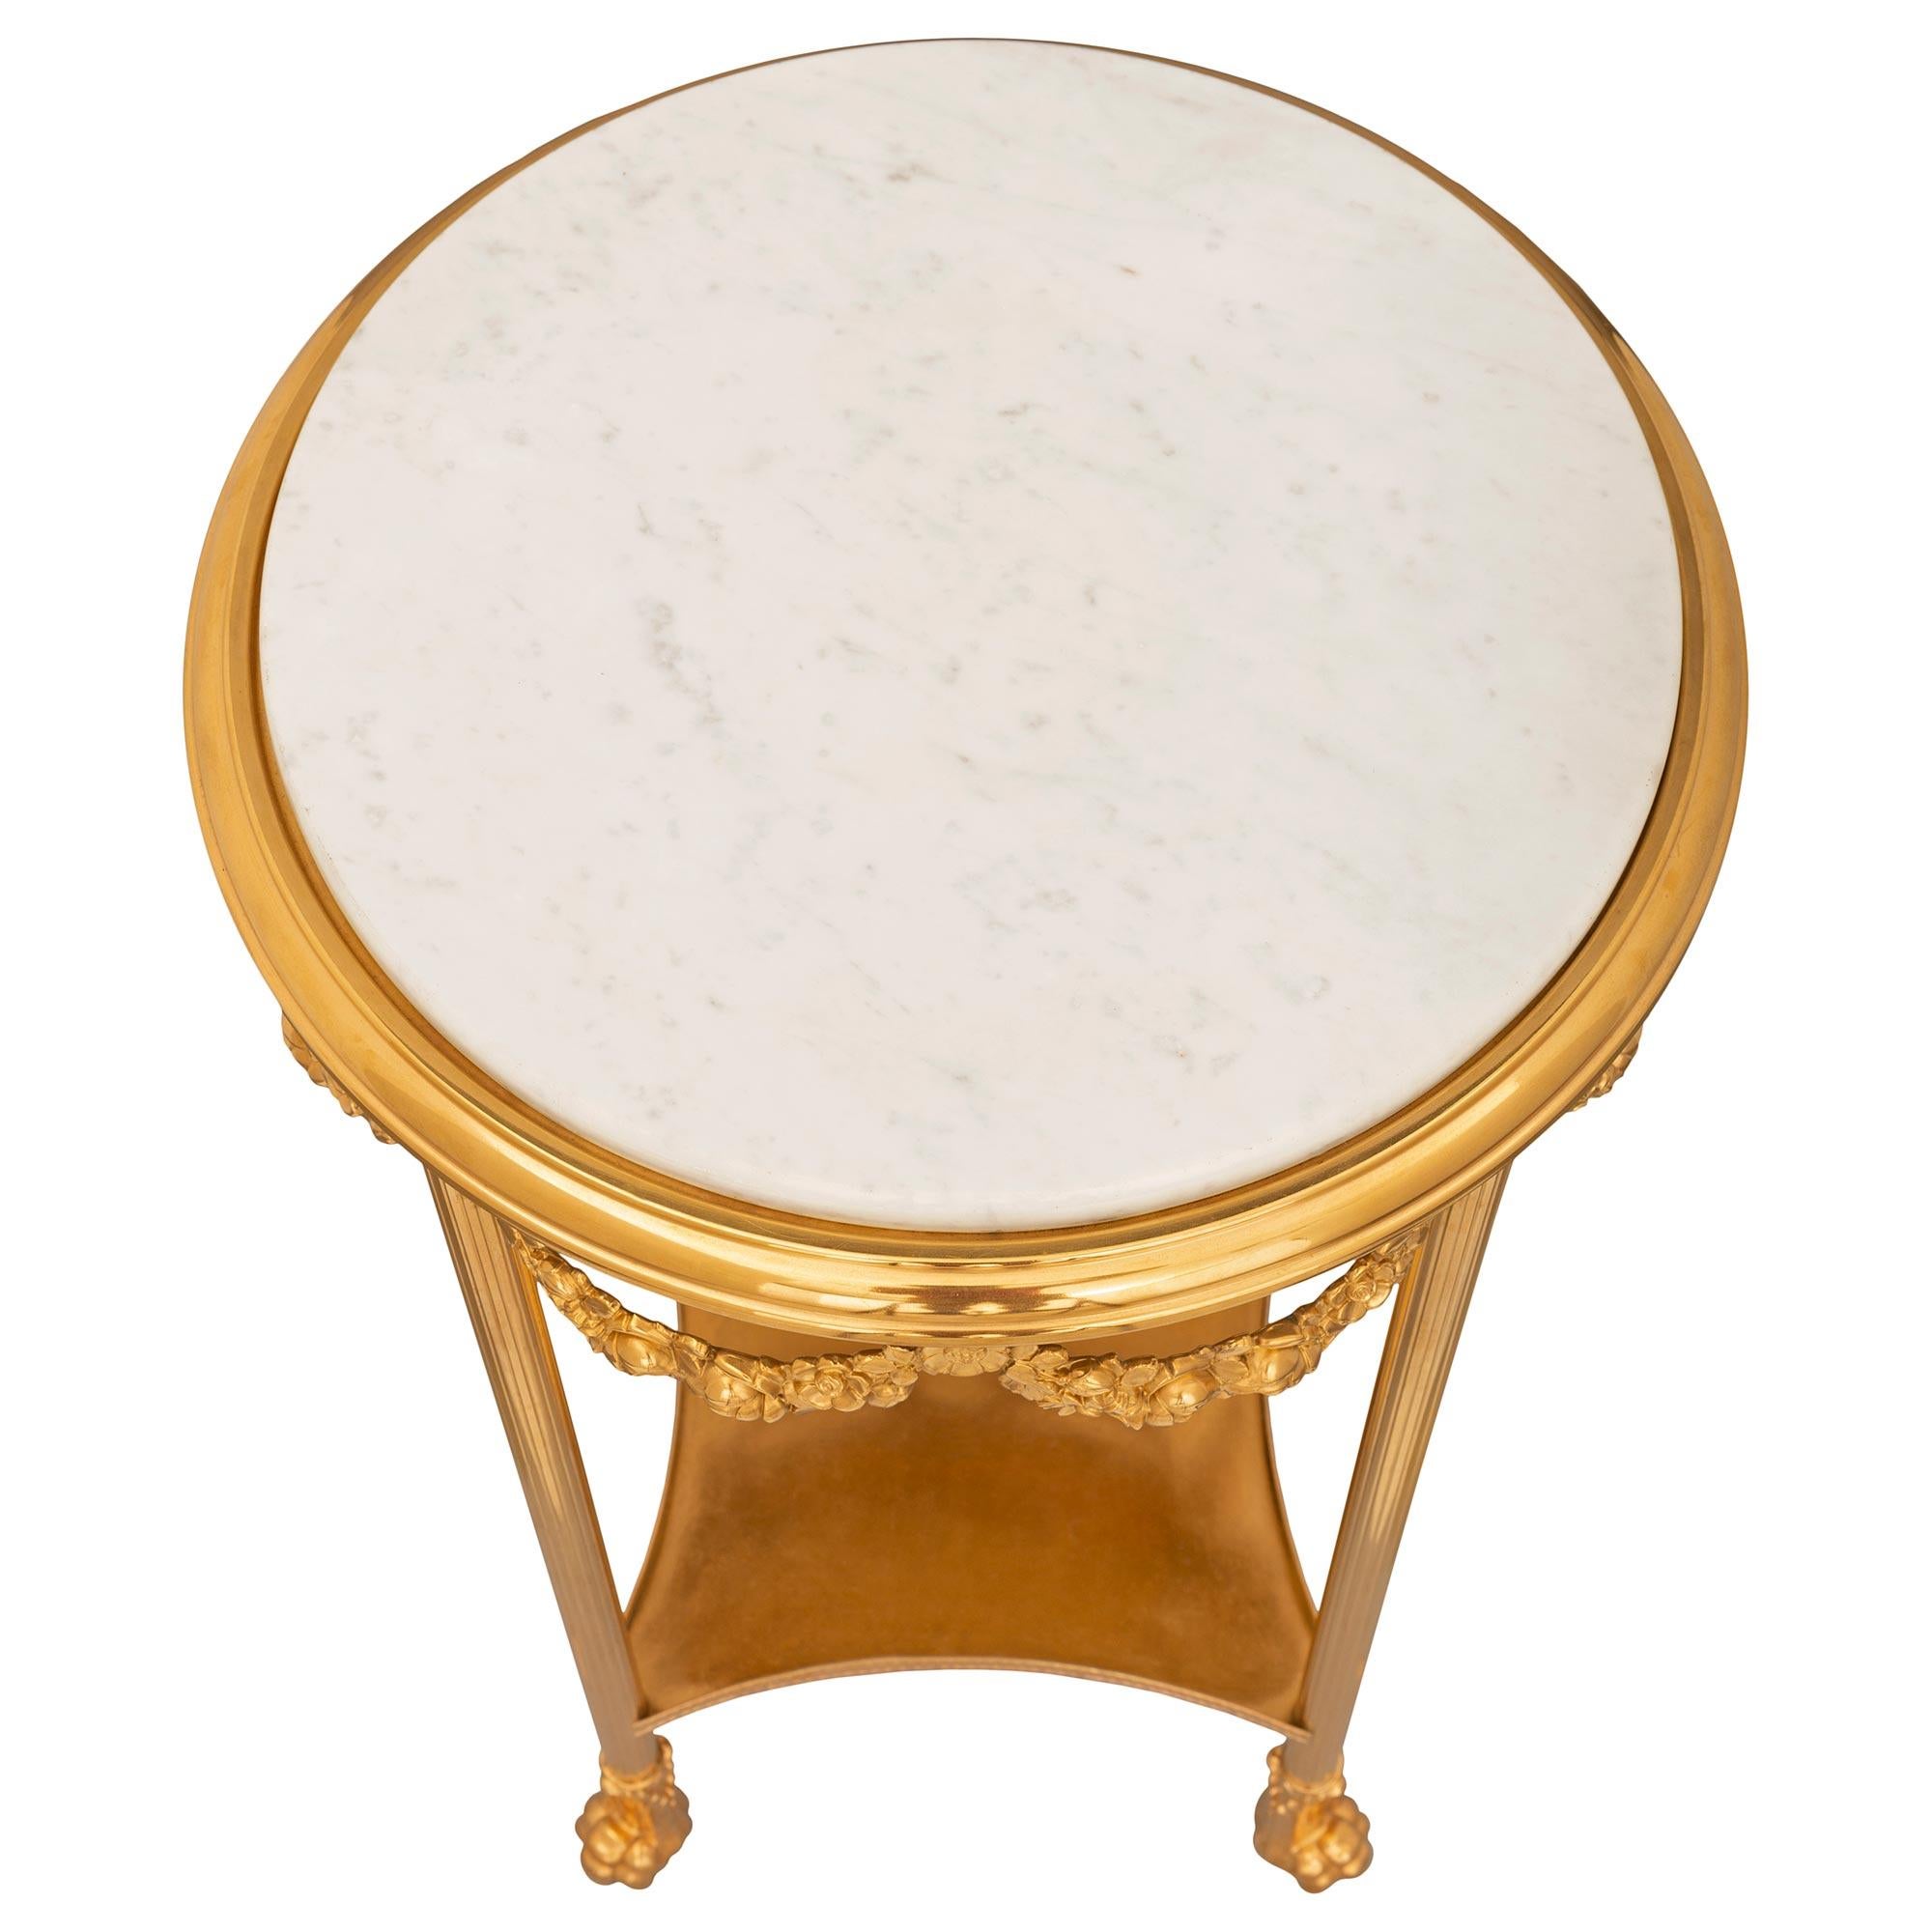 A remarkable French 19th century Neo-Classical St. Belle Époque period ormolu and white carrara marble side table. The circular table is raised by handsome paw feet with acanthus leaves below fluted circular legs connected by a most decorative